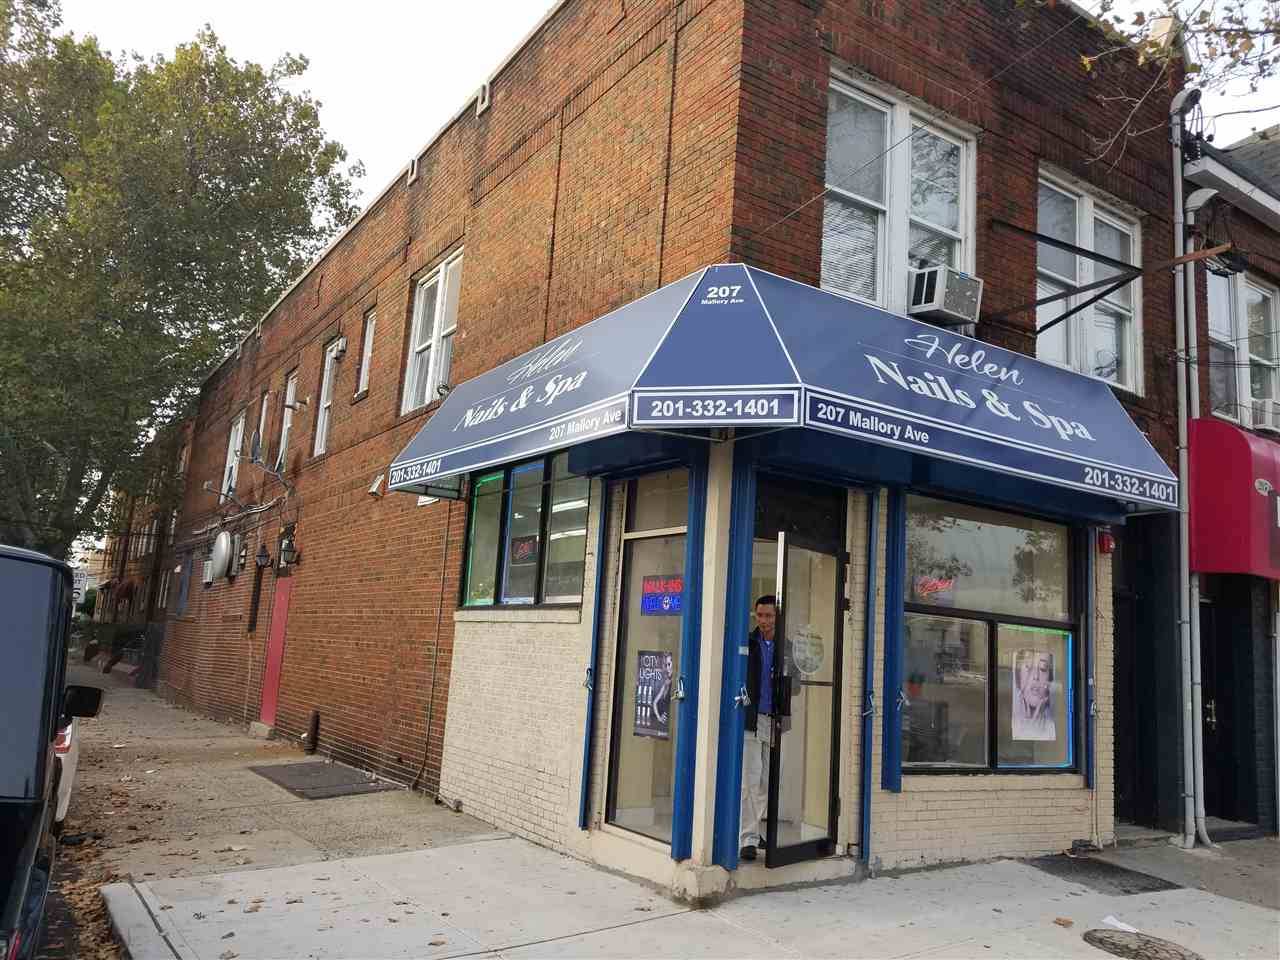 Profitable all brick corner property with commercial space and two 2 bedroom units above